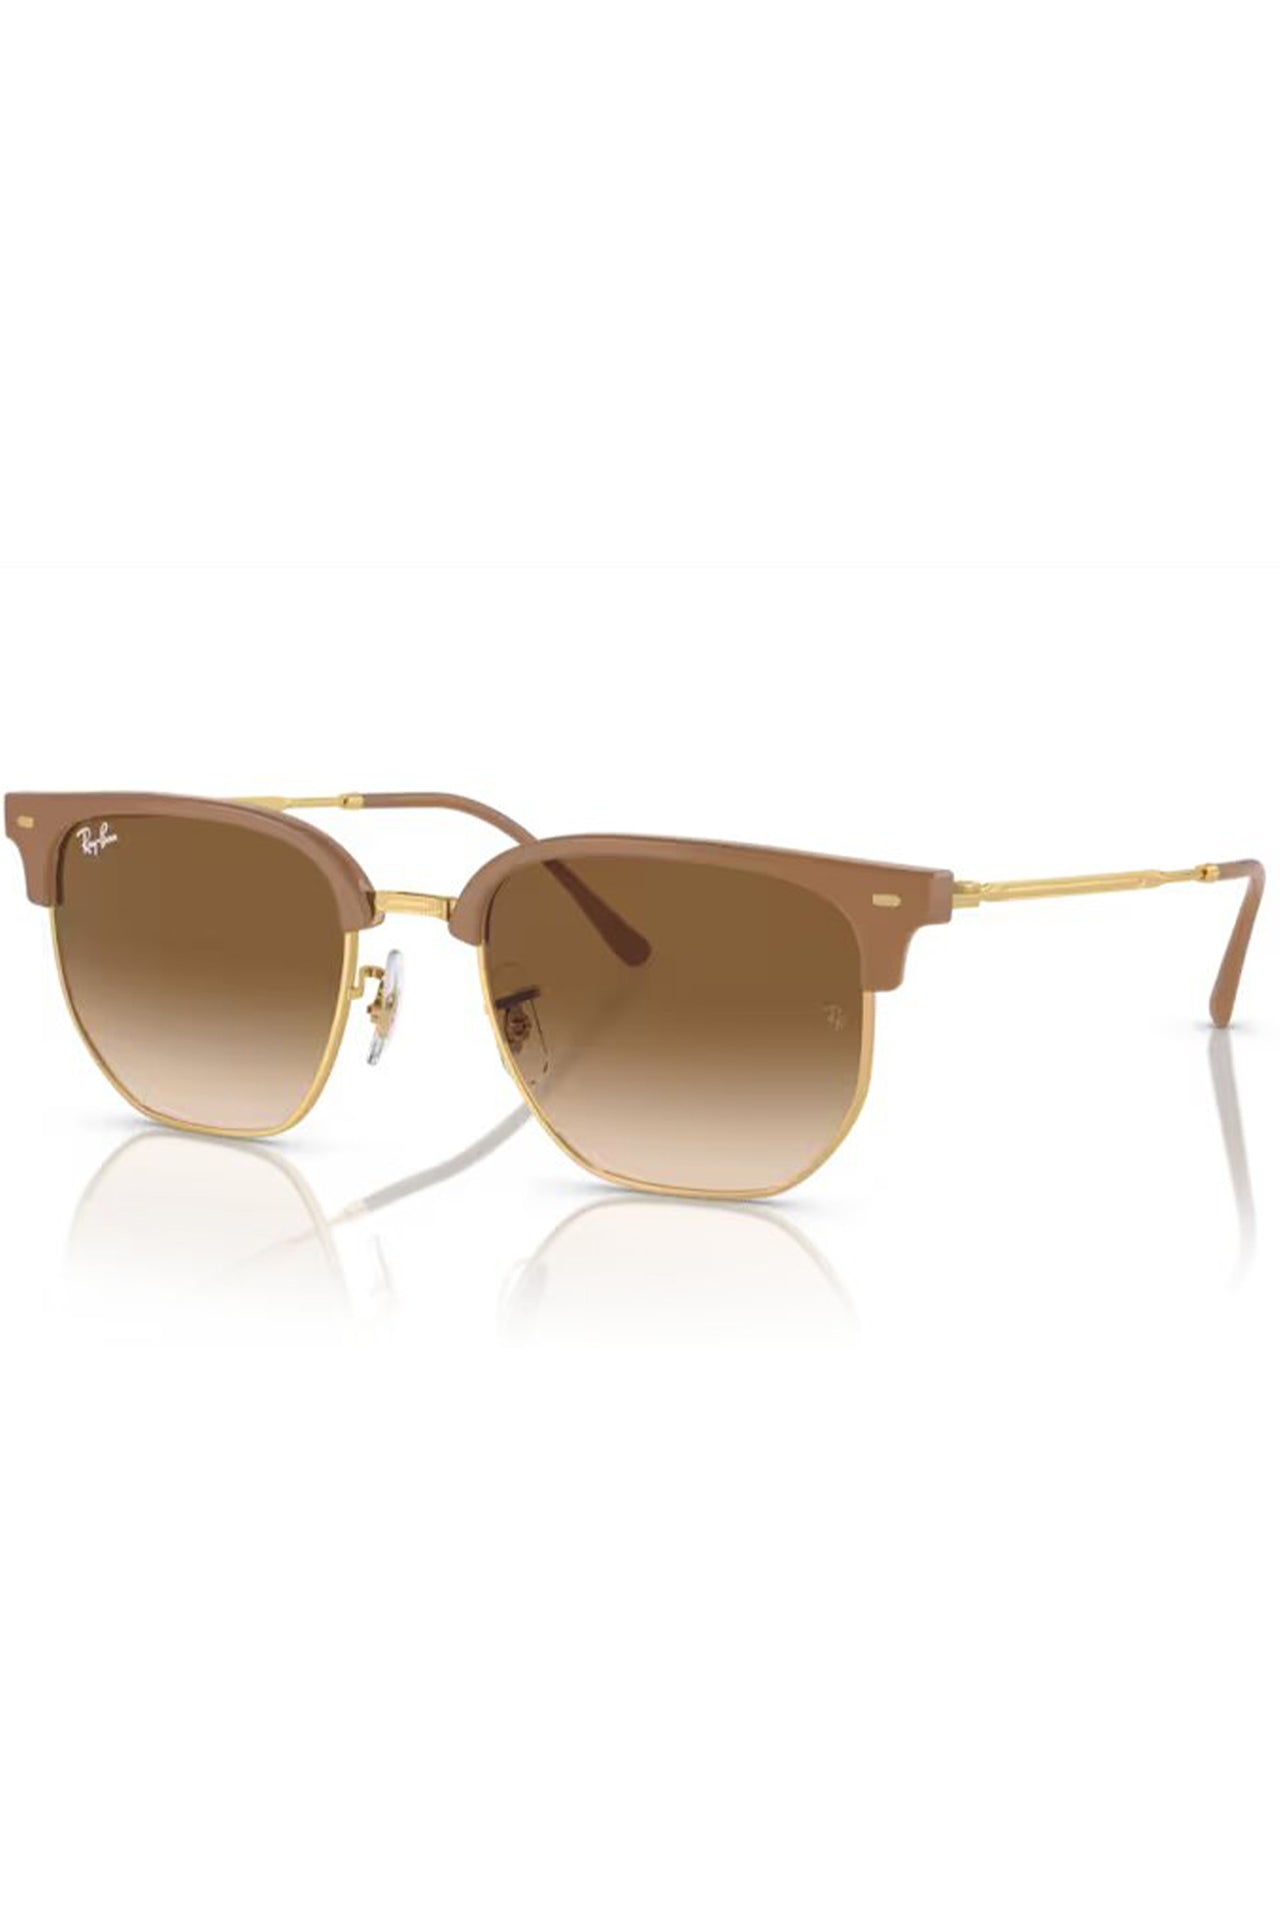 Gafas Ray-Ban New Clubmaster RB4416 672151 51